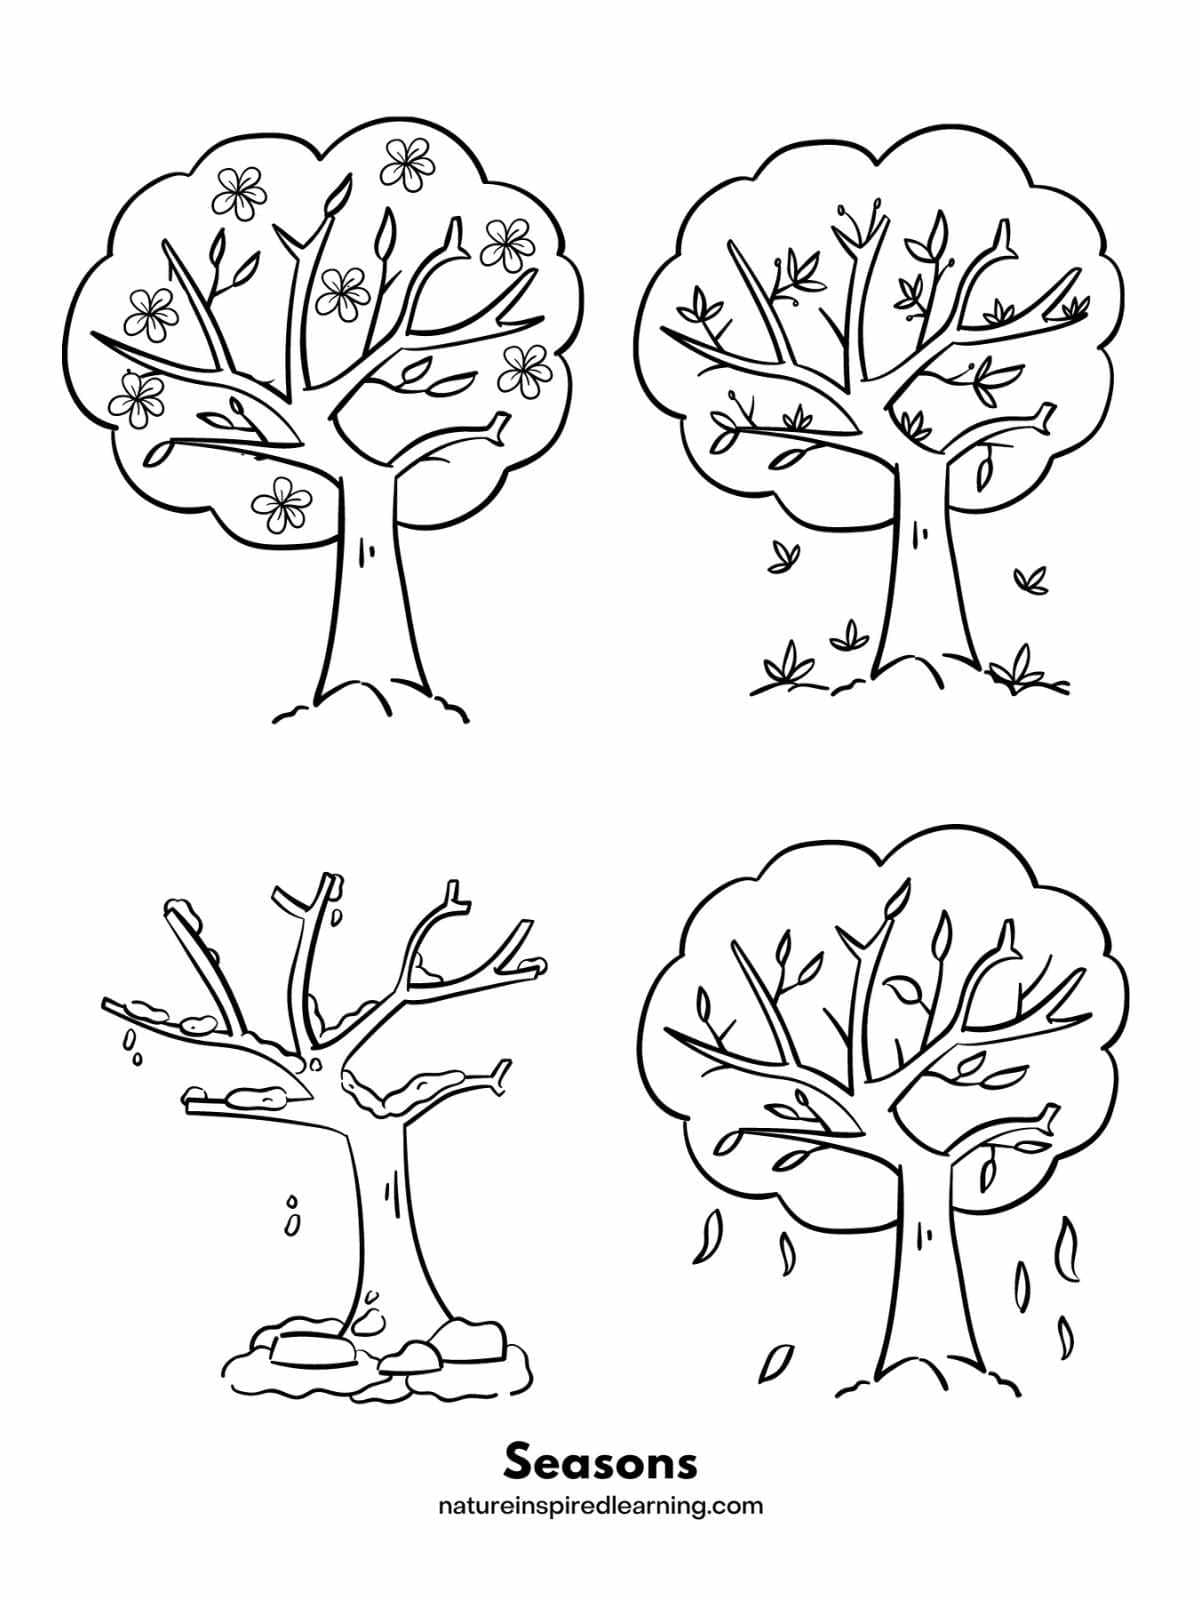 Tree Coloring Pages - Nature Inspired Learning